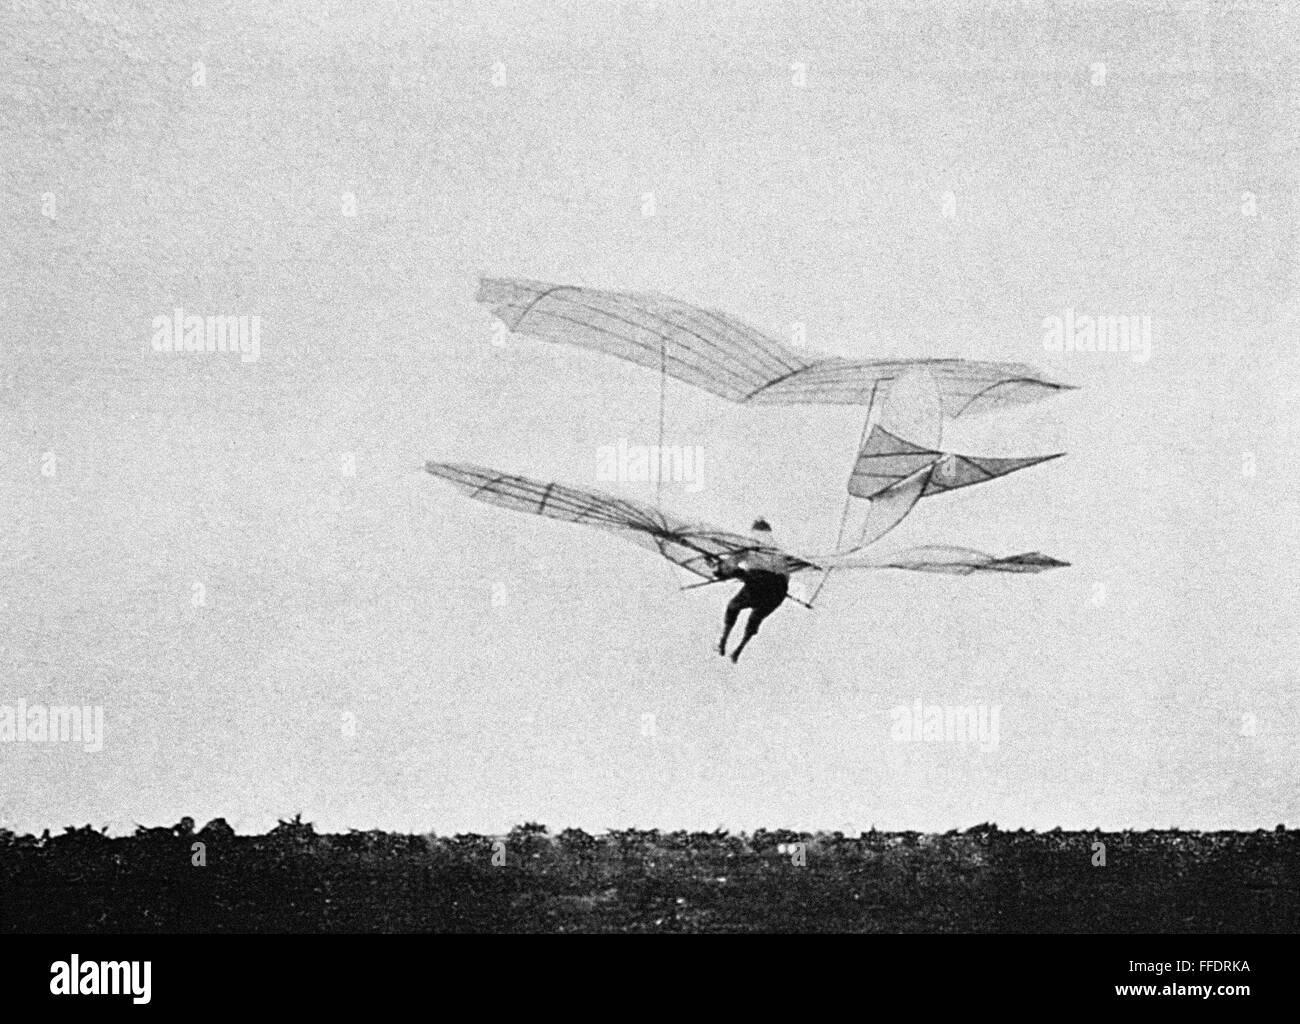 OTTO LILIENTHAL (1848-1896). /nGerman aeronautical engineer. The second of Otto Lilenthal's gliders. Photograph, c1895. Stock Photo